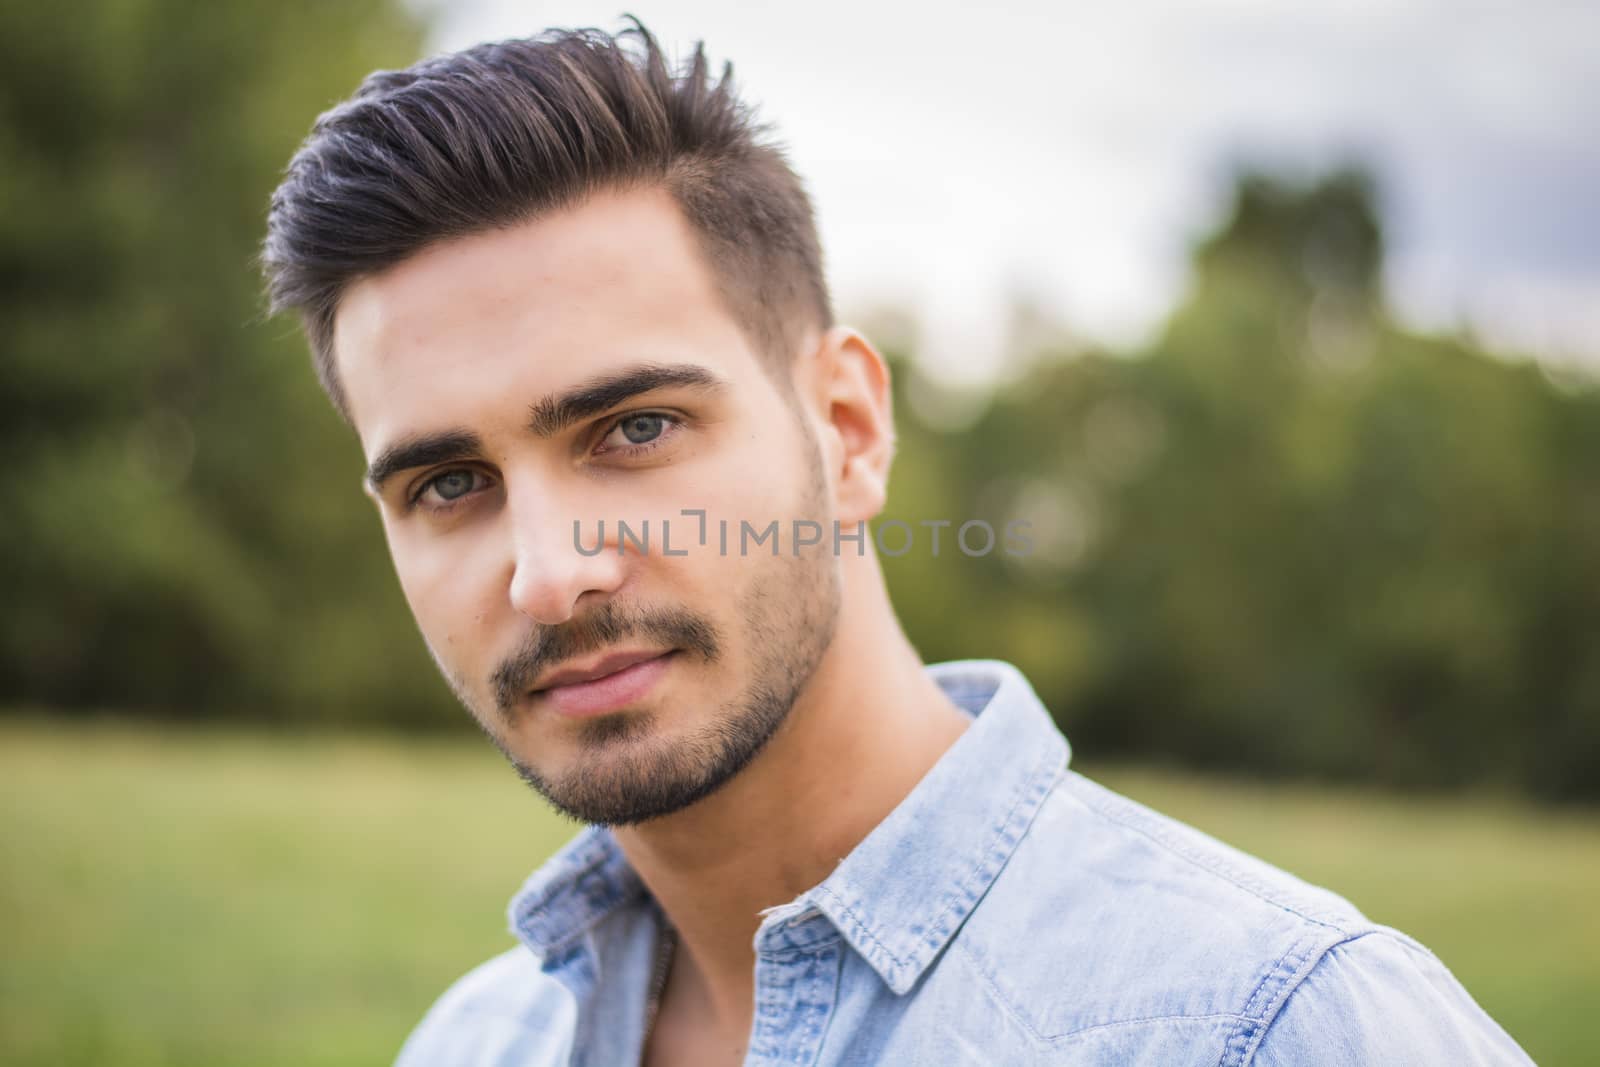 Handsome young man at countryside by artofphoto